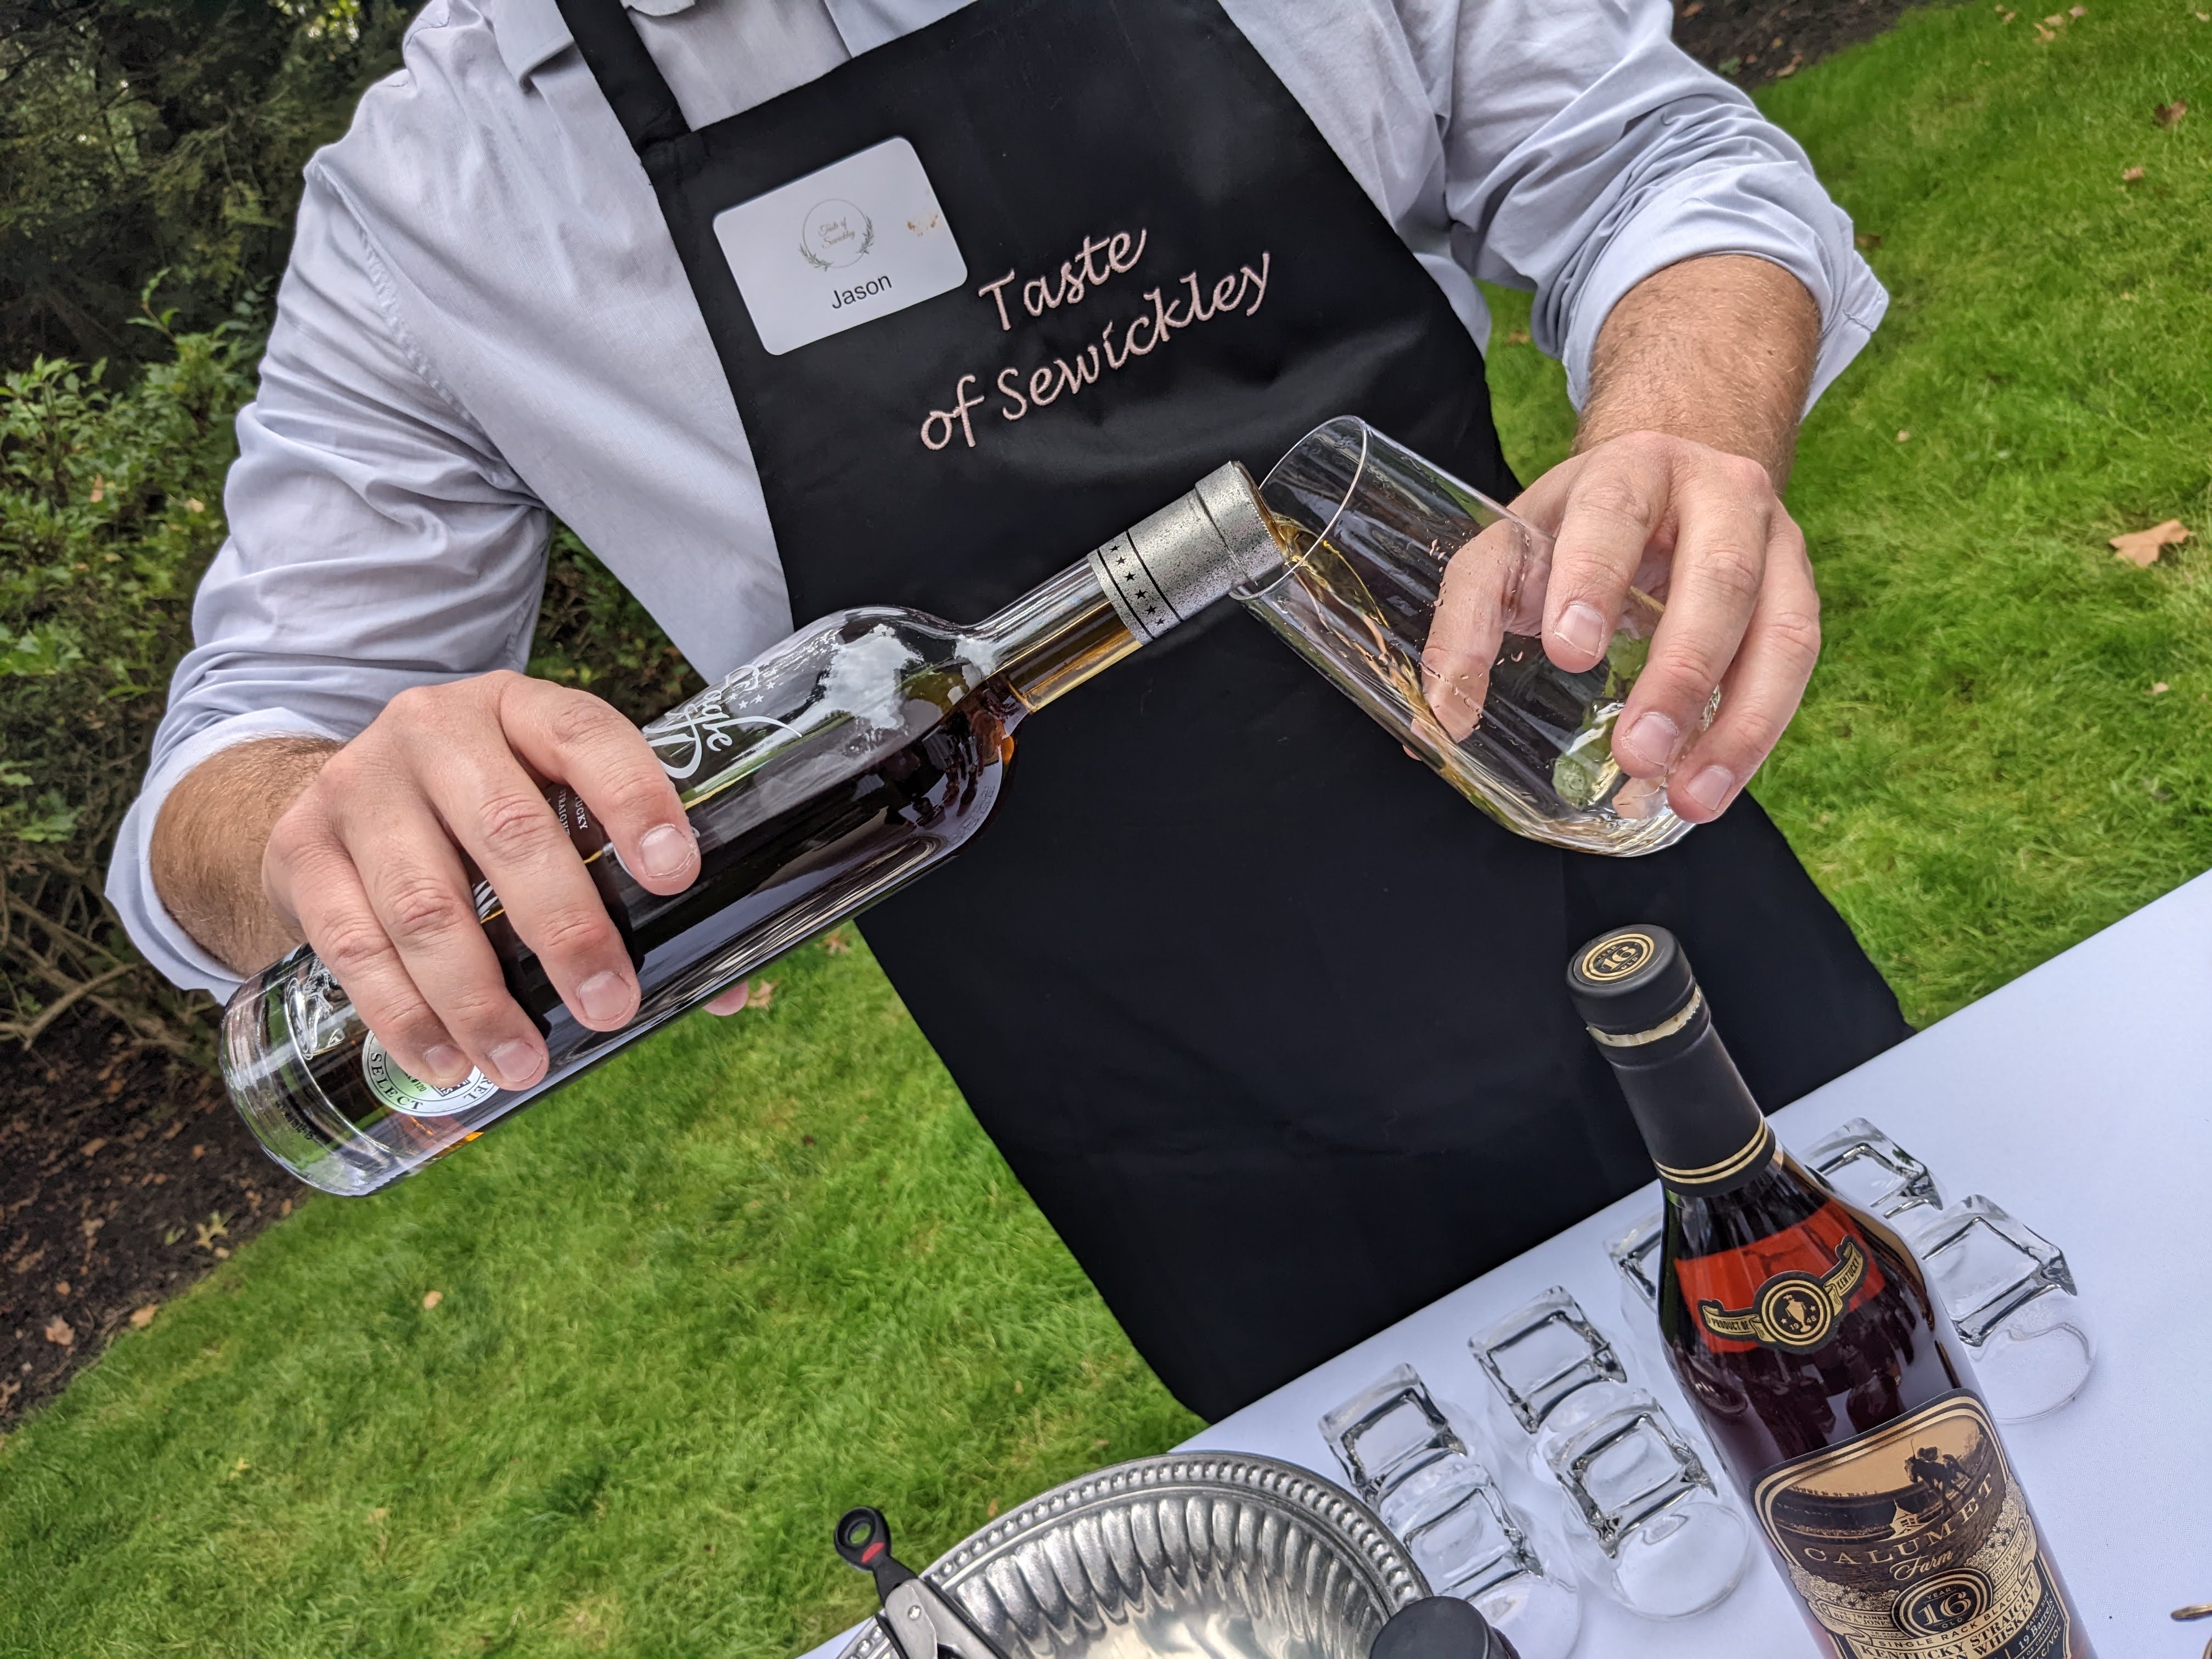 A man in a Taste of Sewickley apron pours a drink